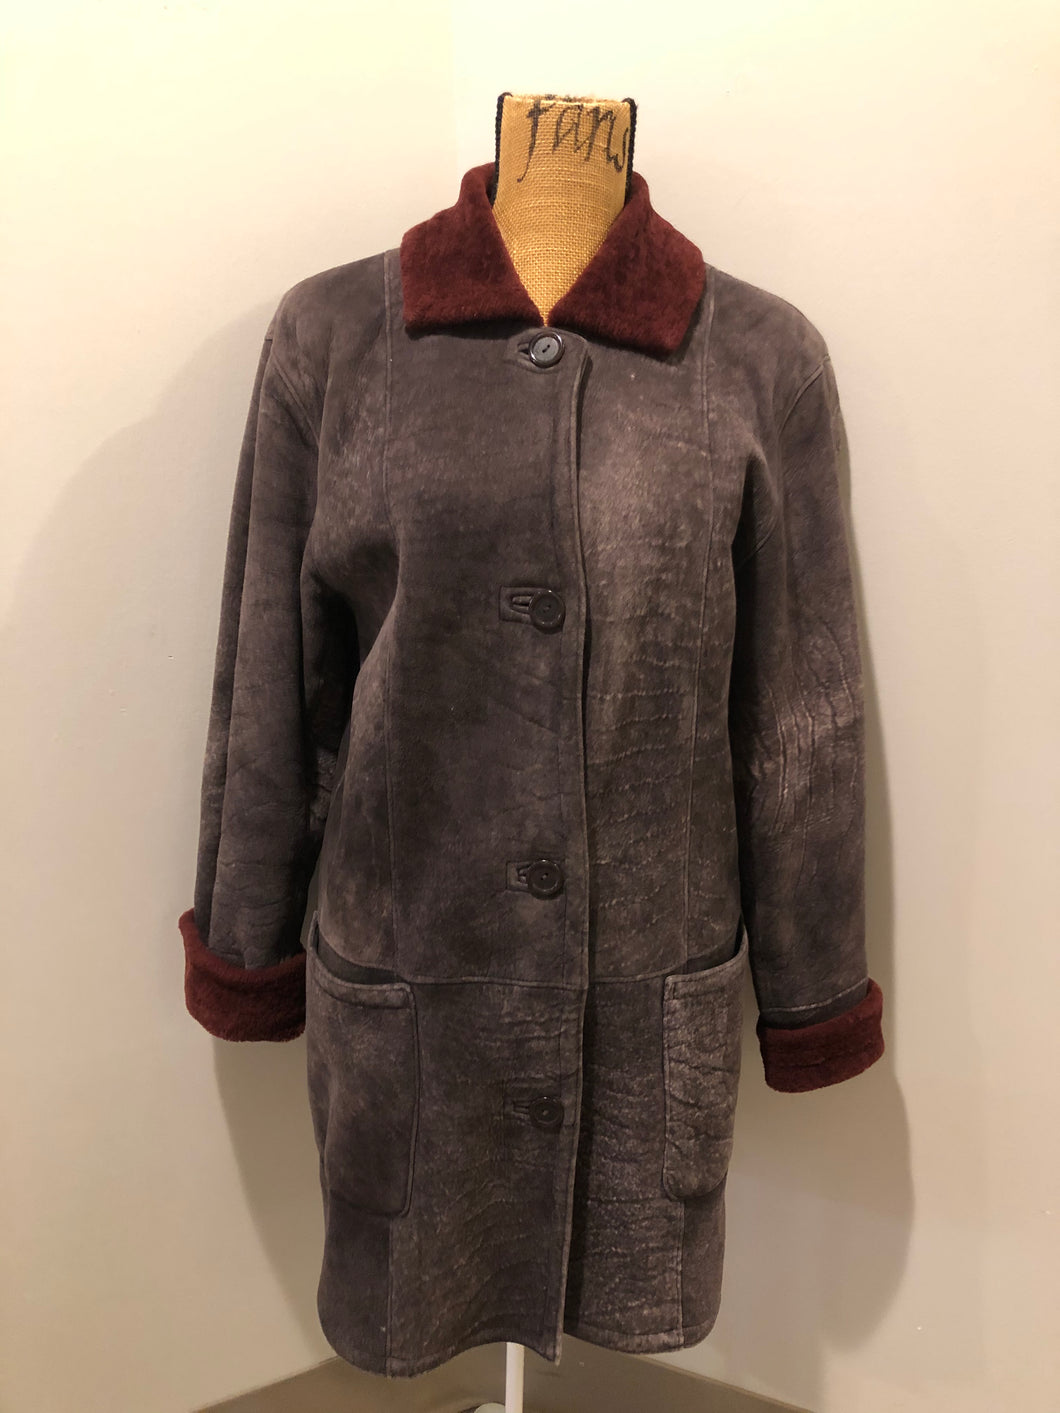 Kingspier Vintage - Dominic Bellissimo distressed dark brown coat with Oxblood colour shearling trim and lining, button closures and patch pockets.